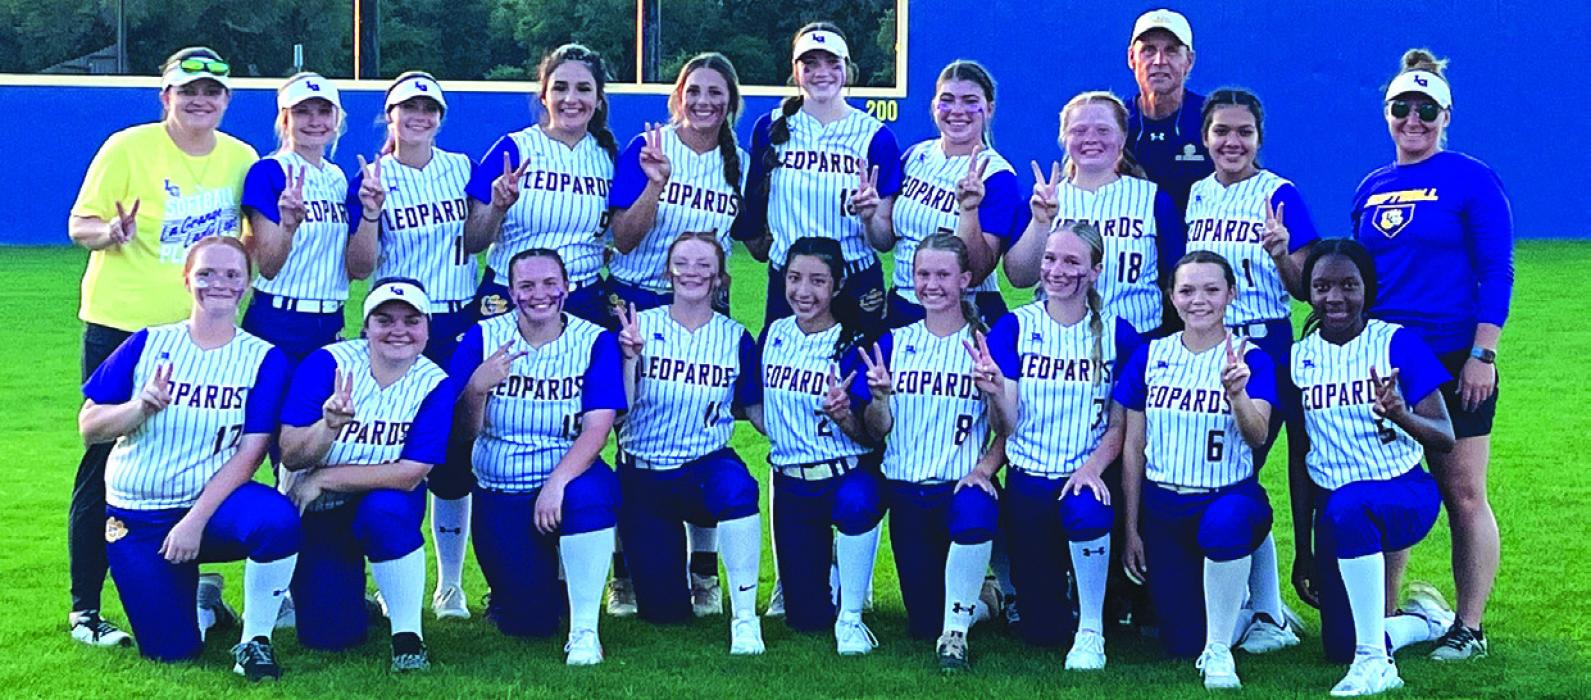 The members of the La Grange varsity softball team pose Thursday in Rice after their 23-0 victory over Houston Wheatley in the opening round of the 4A playoffs. The Lady Leps now advance to face Salado in the second round. Details of that match-up were not finalized as of press time. Photo courtesy of Megan Cooper